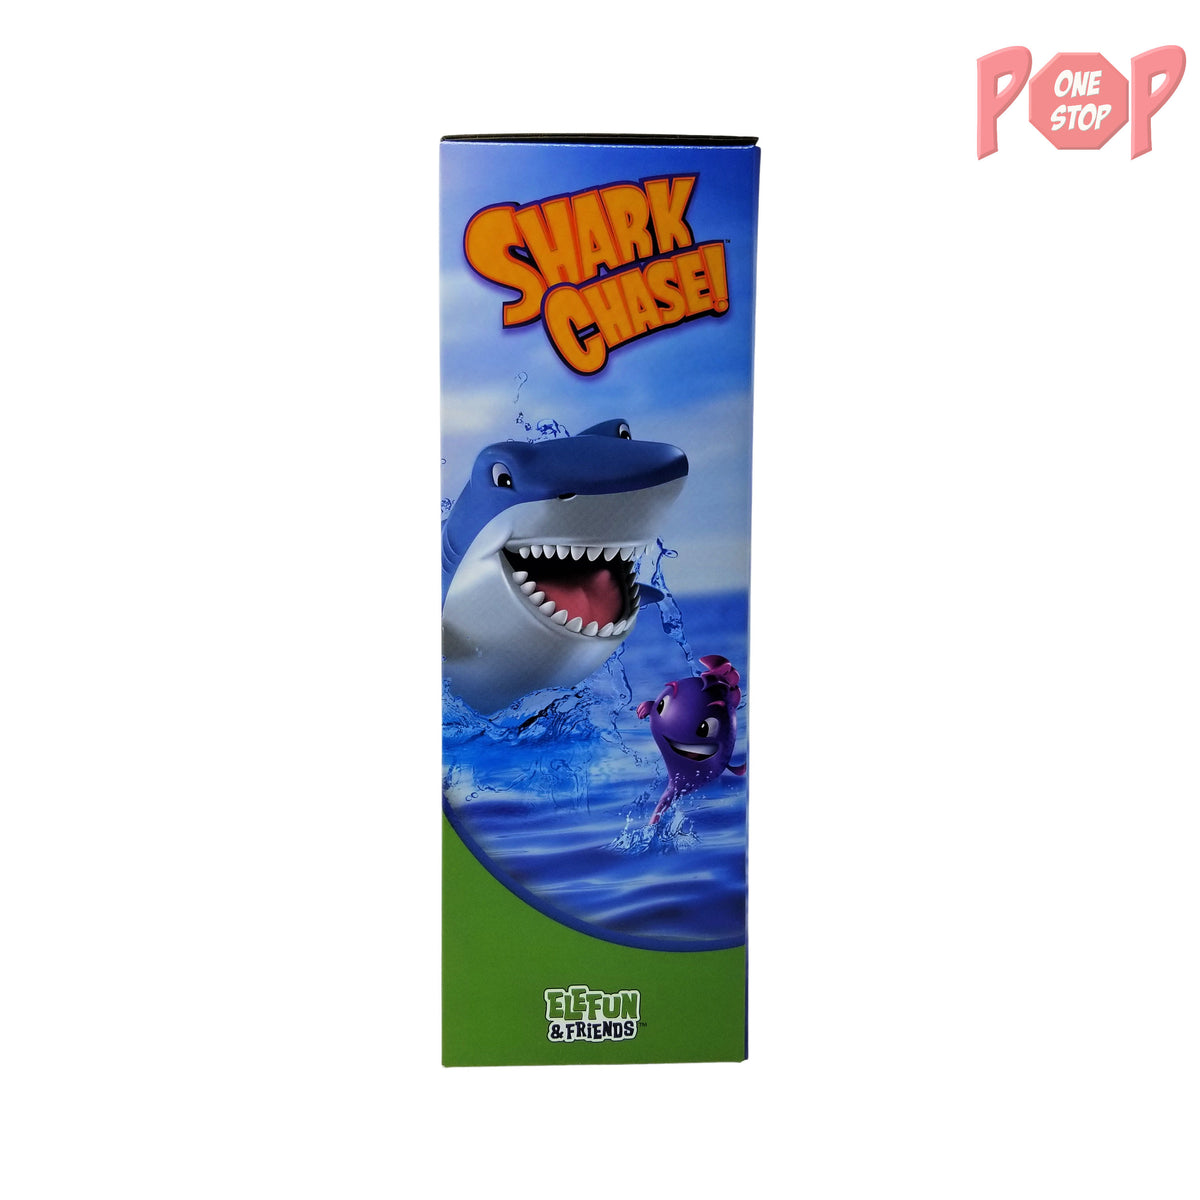 Shark Chase Game – Pop One Stop